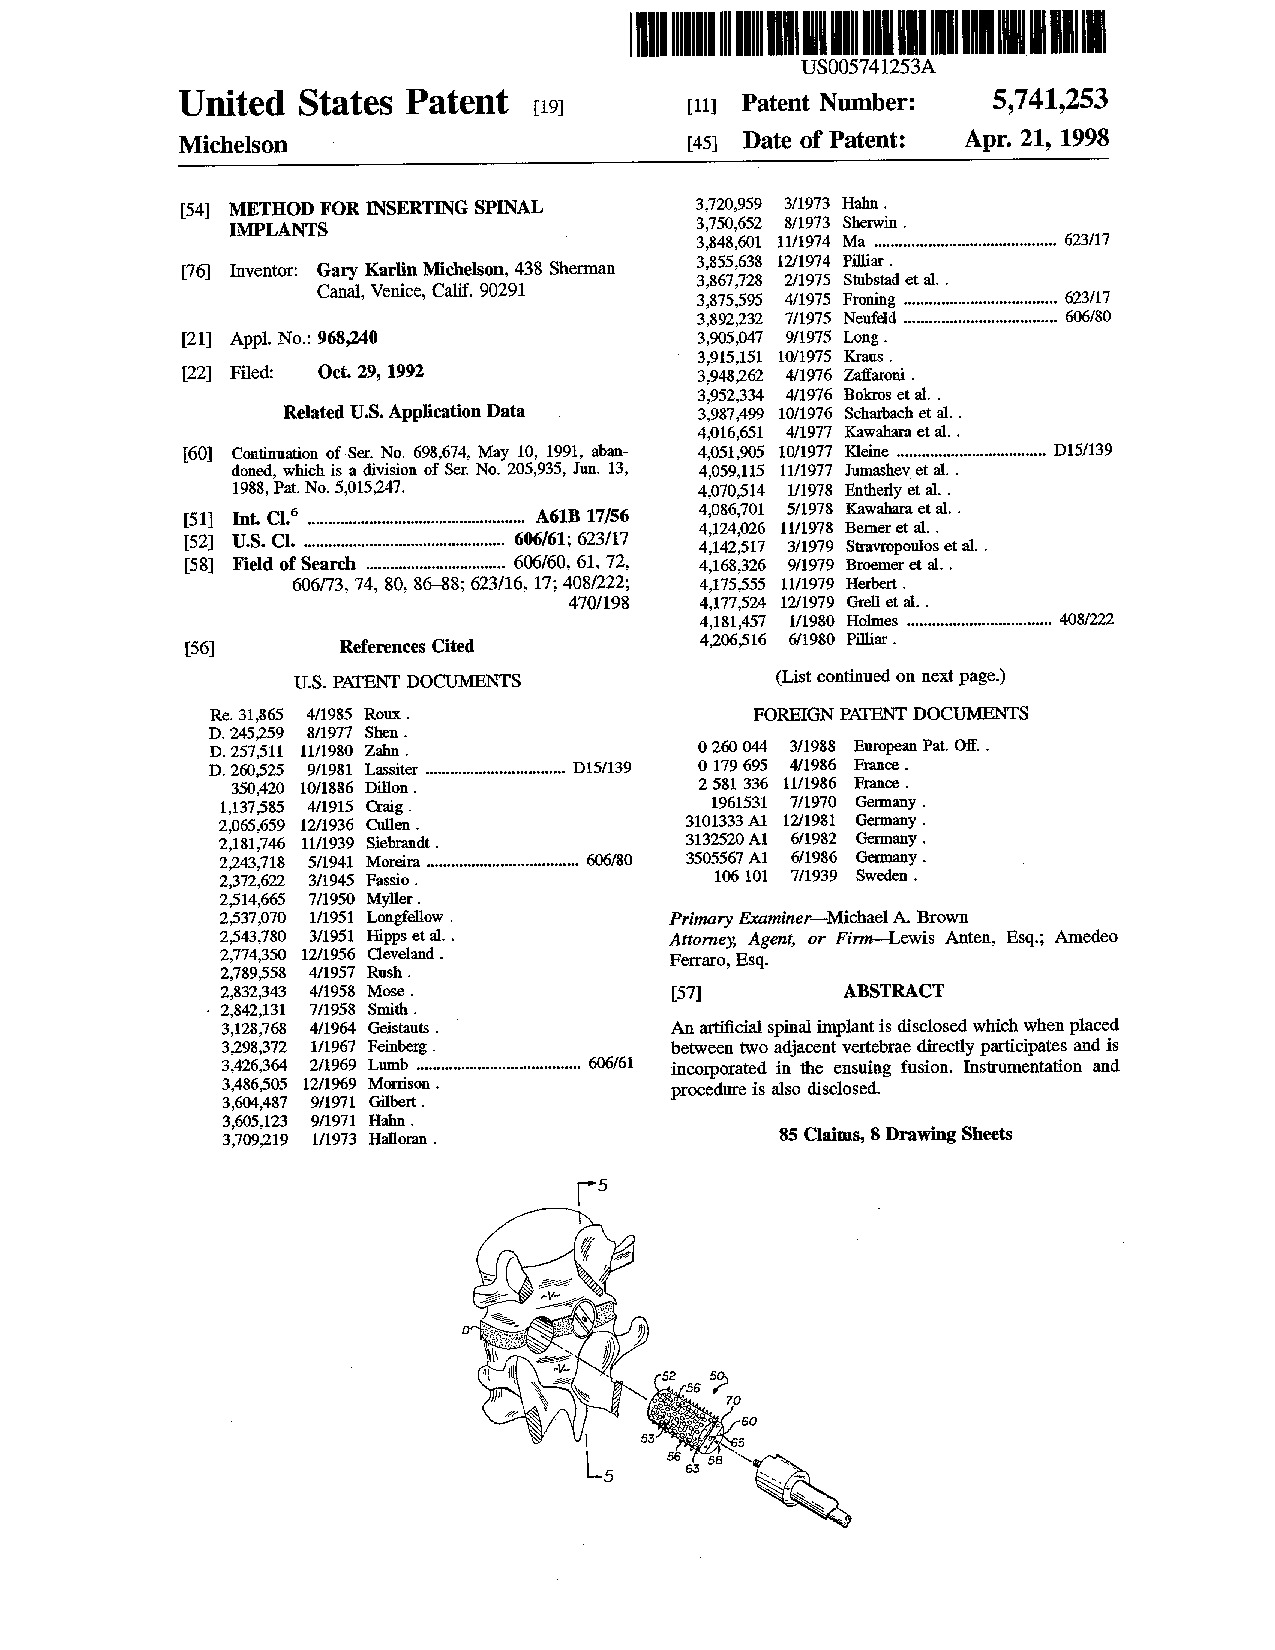 Method for inserting spinal implants - Patent 5,741,253